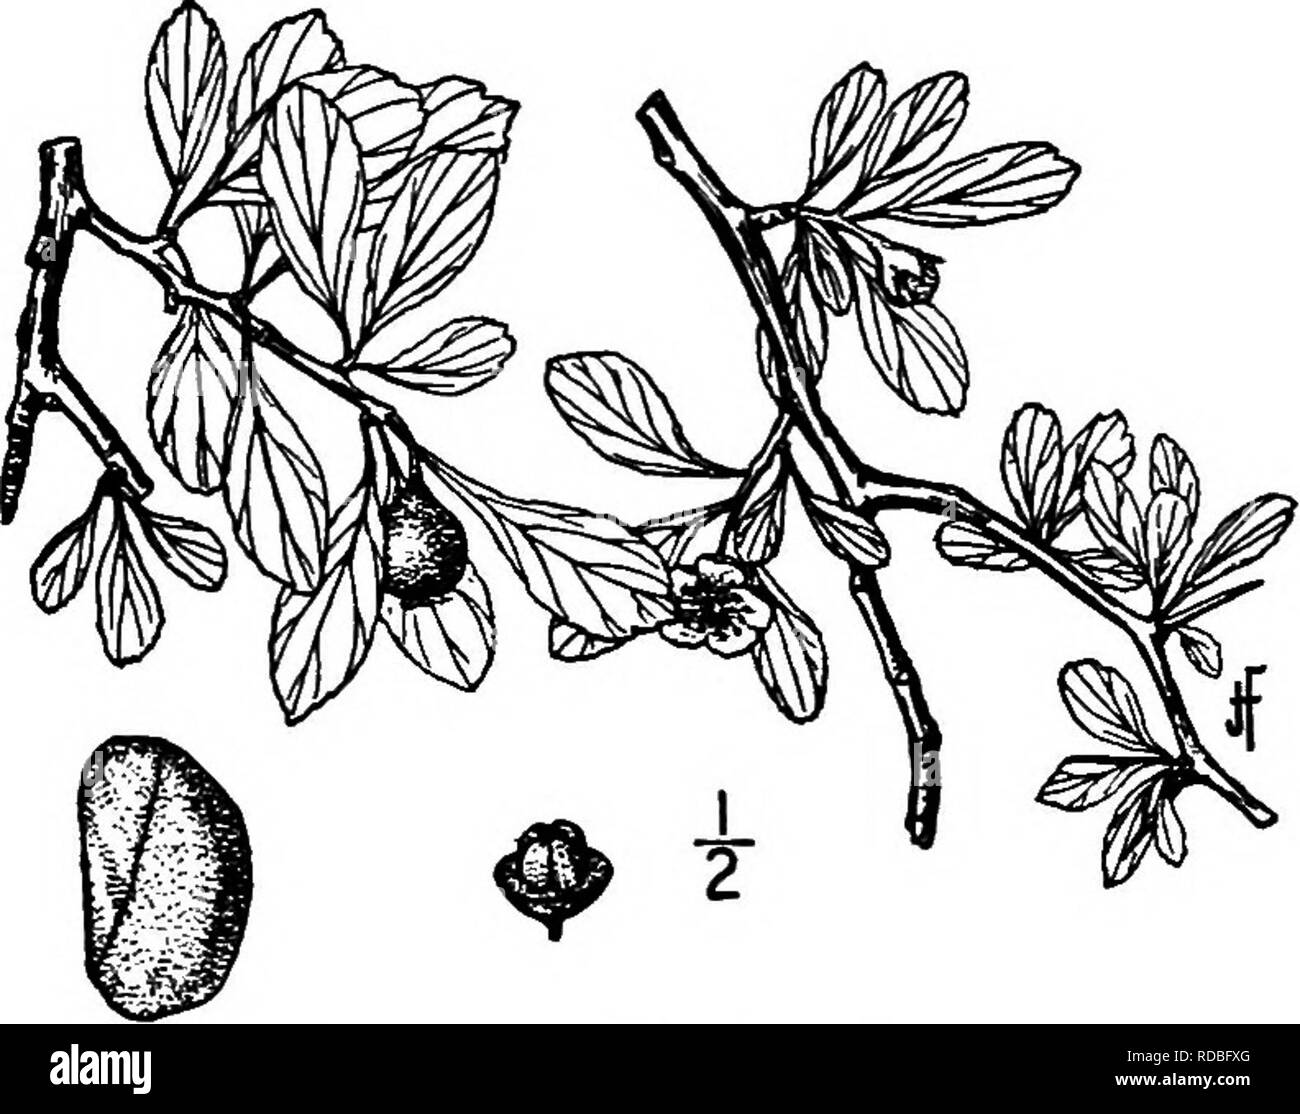 . North American trees : being descriptions and illustrations of the trees growing independently of cultivation in North America, north of Mexico and the West Indies . Trees. 456 The Thorn Trees the lobes slightly haiiy on the inner surface, lanceolate, long-pointed, glandular- toothed; stamens lo to 20; anthers pink; styles 3 to 5. The fruit is pear-shaped or oblong, about 10 mm. thick, yellow or yellow-green, sometimes tinged with red; the calyx-lobes are reflexed; the flesh is firm; it contains 3 to 5 nutlets, com- monly 4, about 7 mm. long, strongly ridged on the back, the nest about 8 mm. Stock Photo